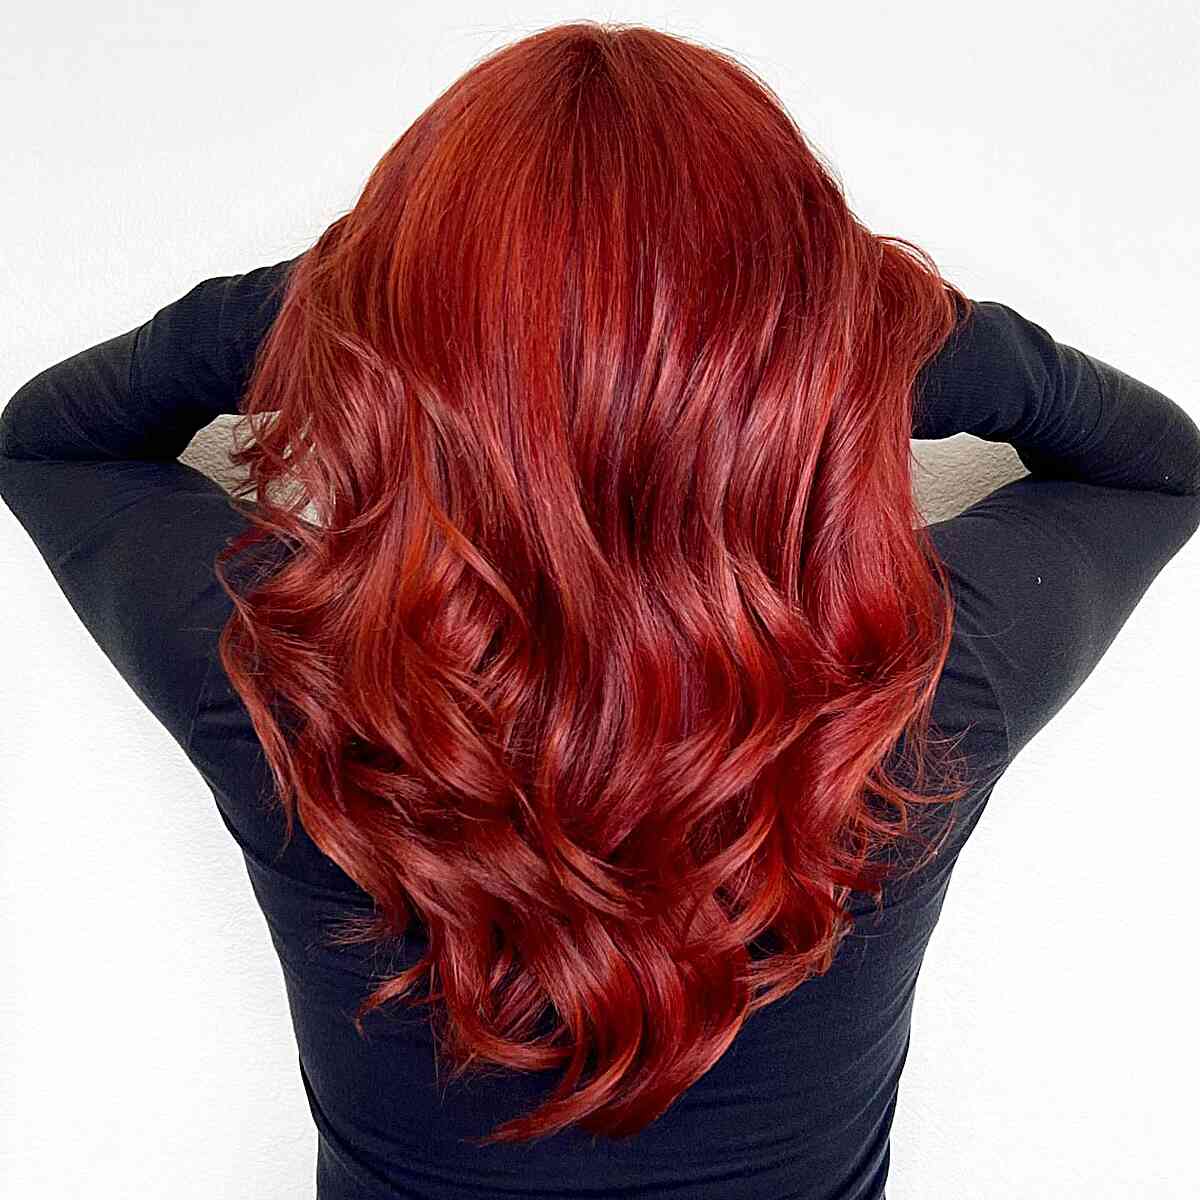 Hot Tamale with A Bright Red Color on Wavy Hair